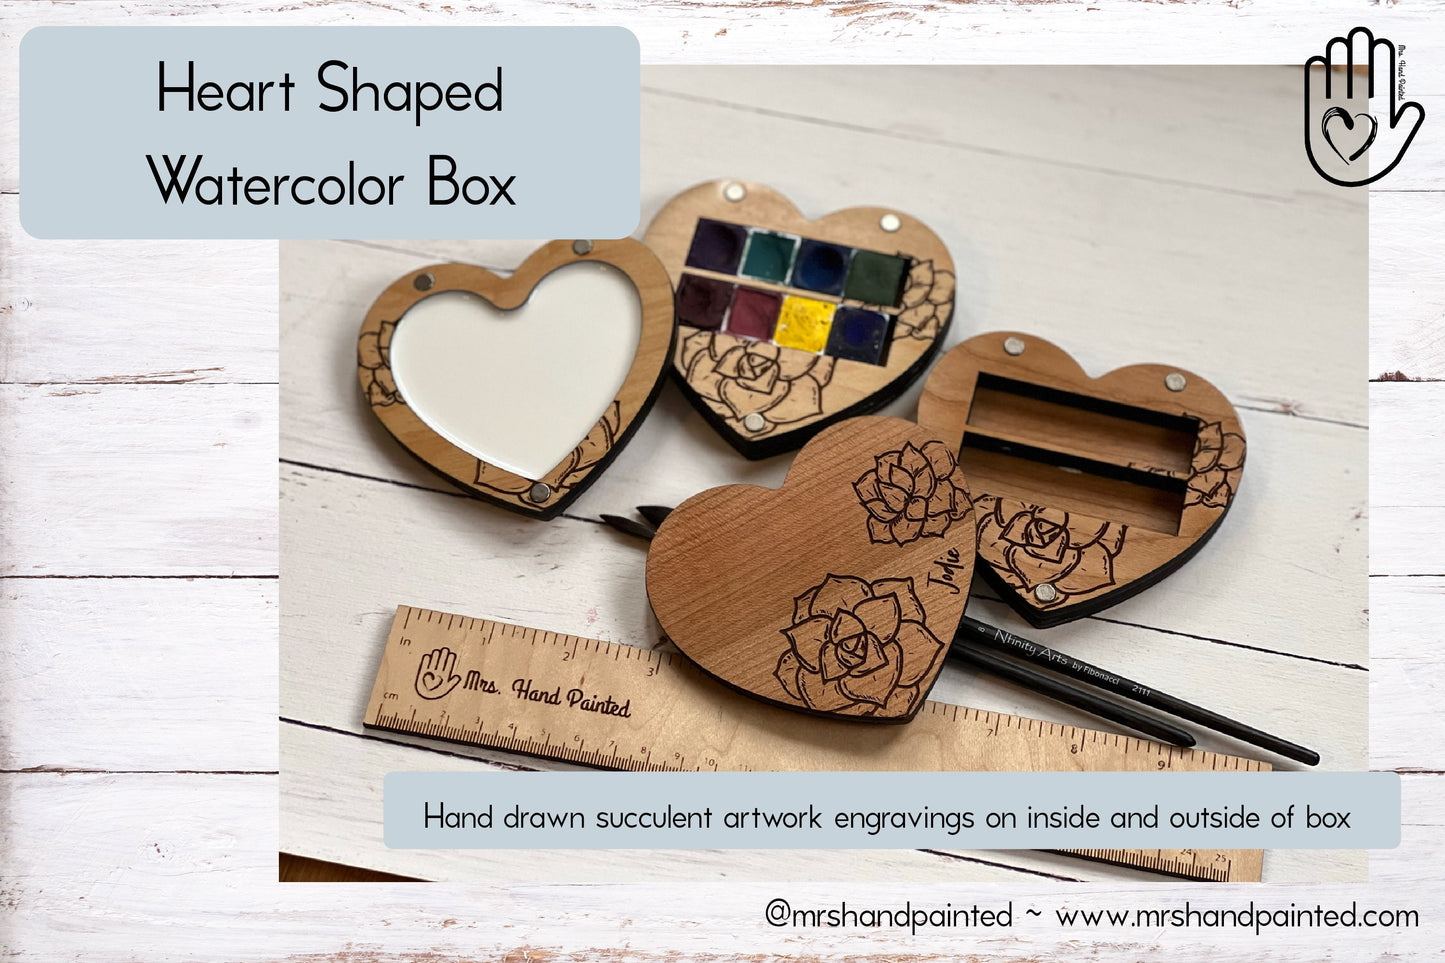 Heart Shaped with Succulents Engraved Wood Watercolor Box with Personalization